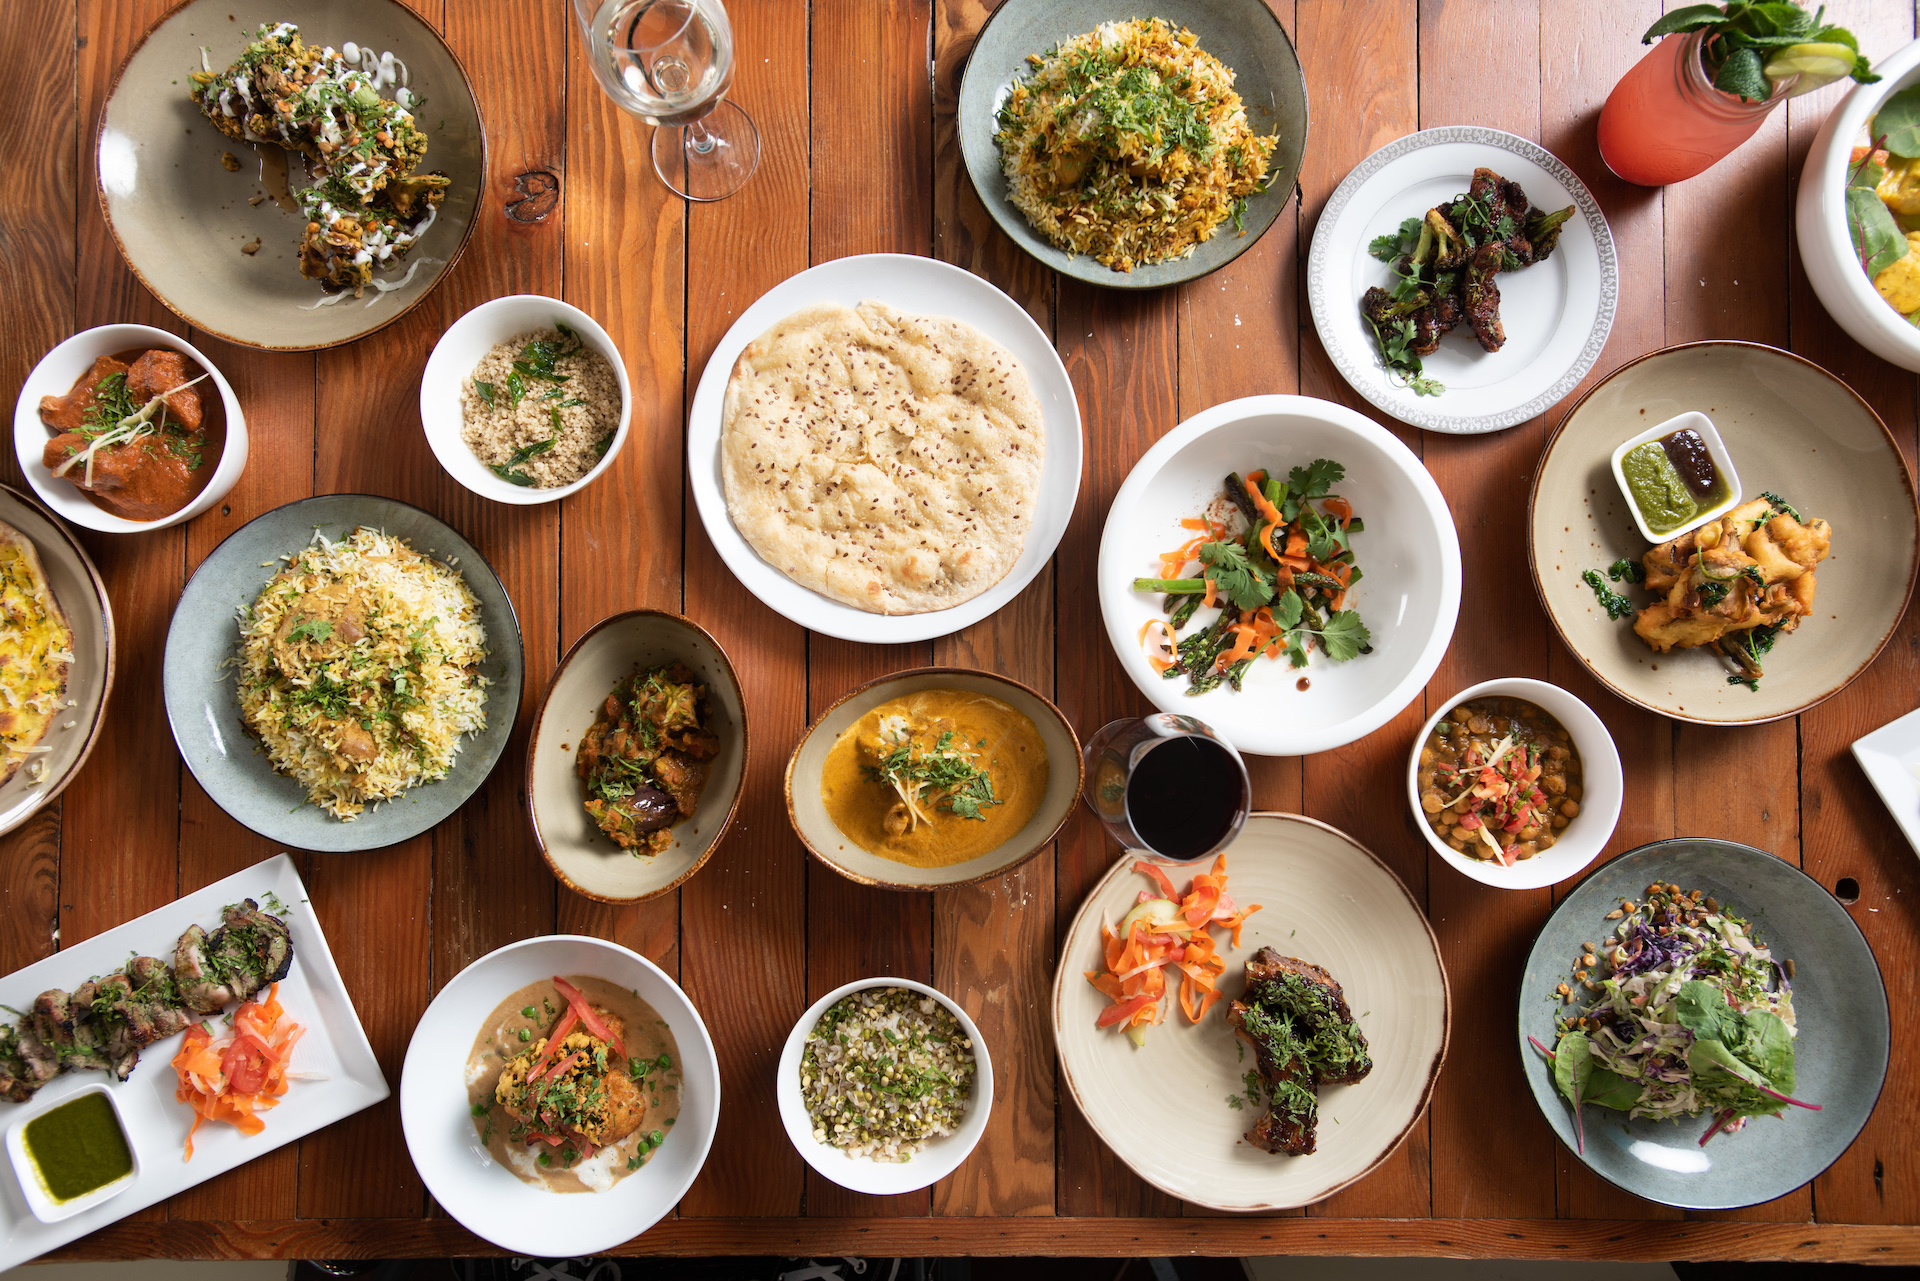 There’s no shortage of dishes to enjoy at the rebranded Ritu.